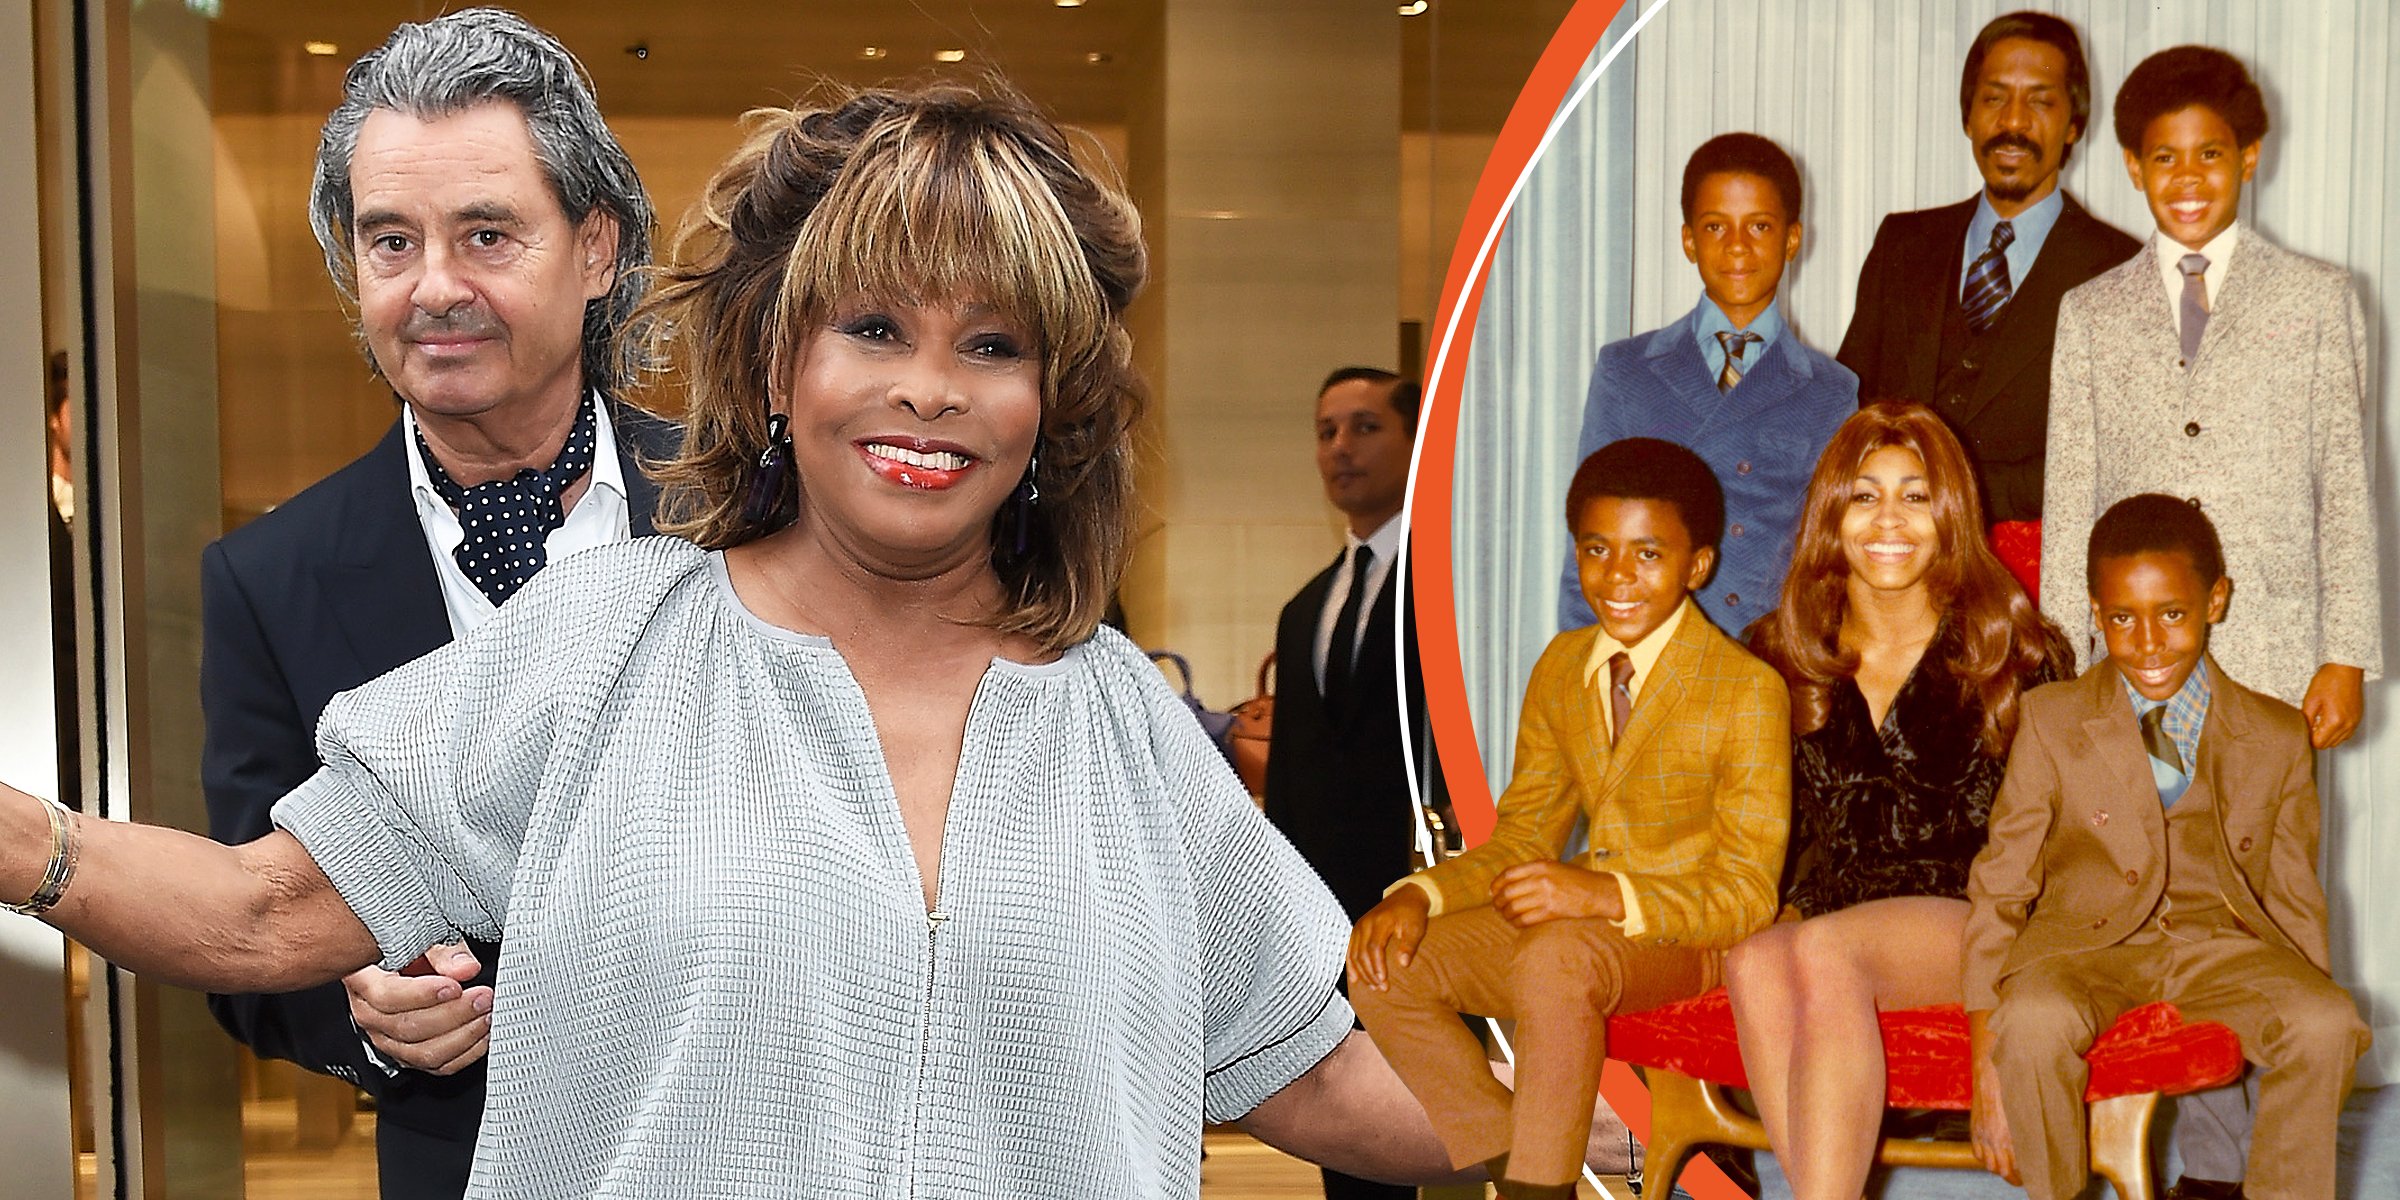 Tina Turner and her husband, Erwin Bach | Tina Turner, Ike Turner, and their kids | Source: Getty Images